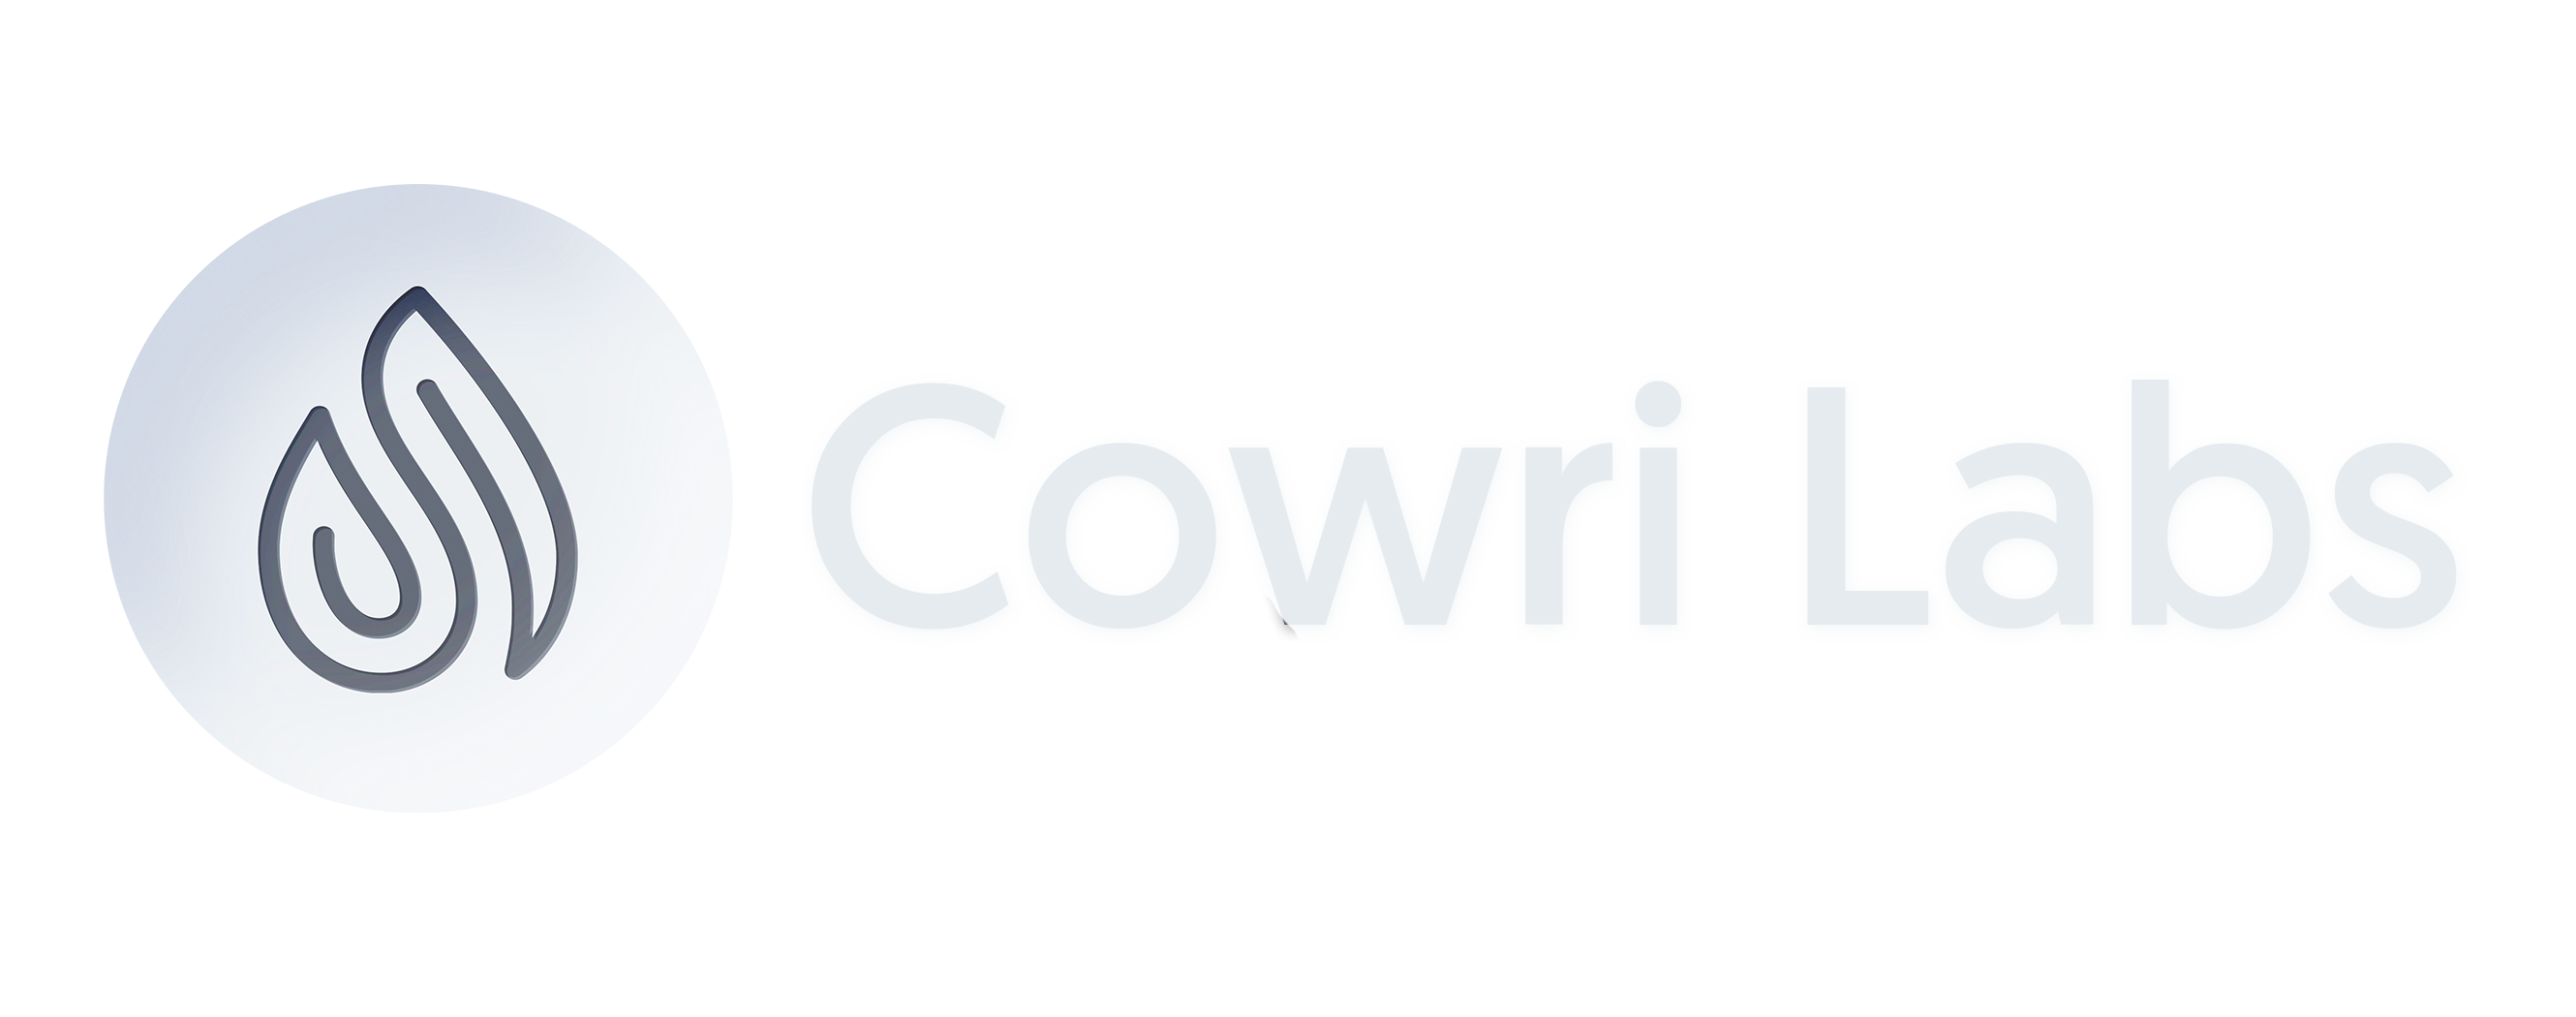 Abstract lines resembling the cross-section of a cowrie shell next to text 'Cowri Labs'